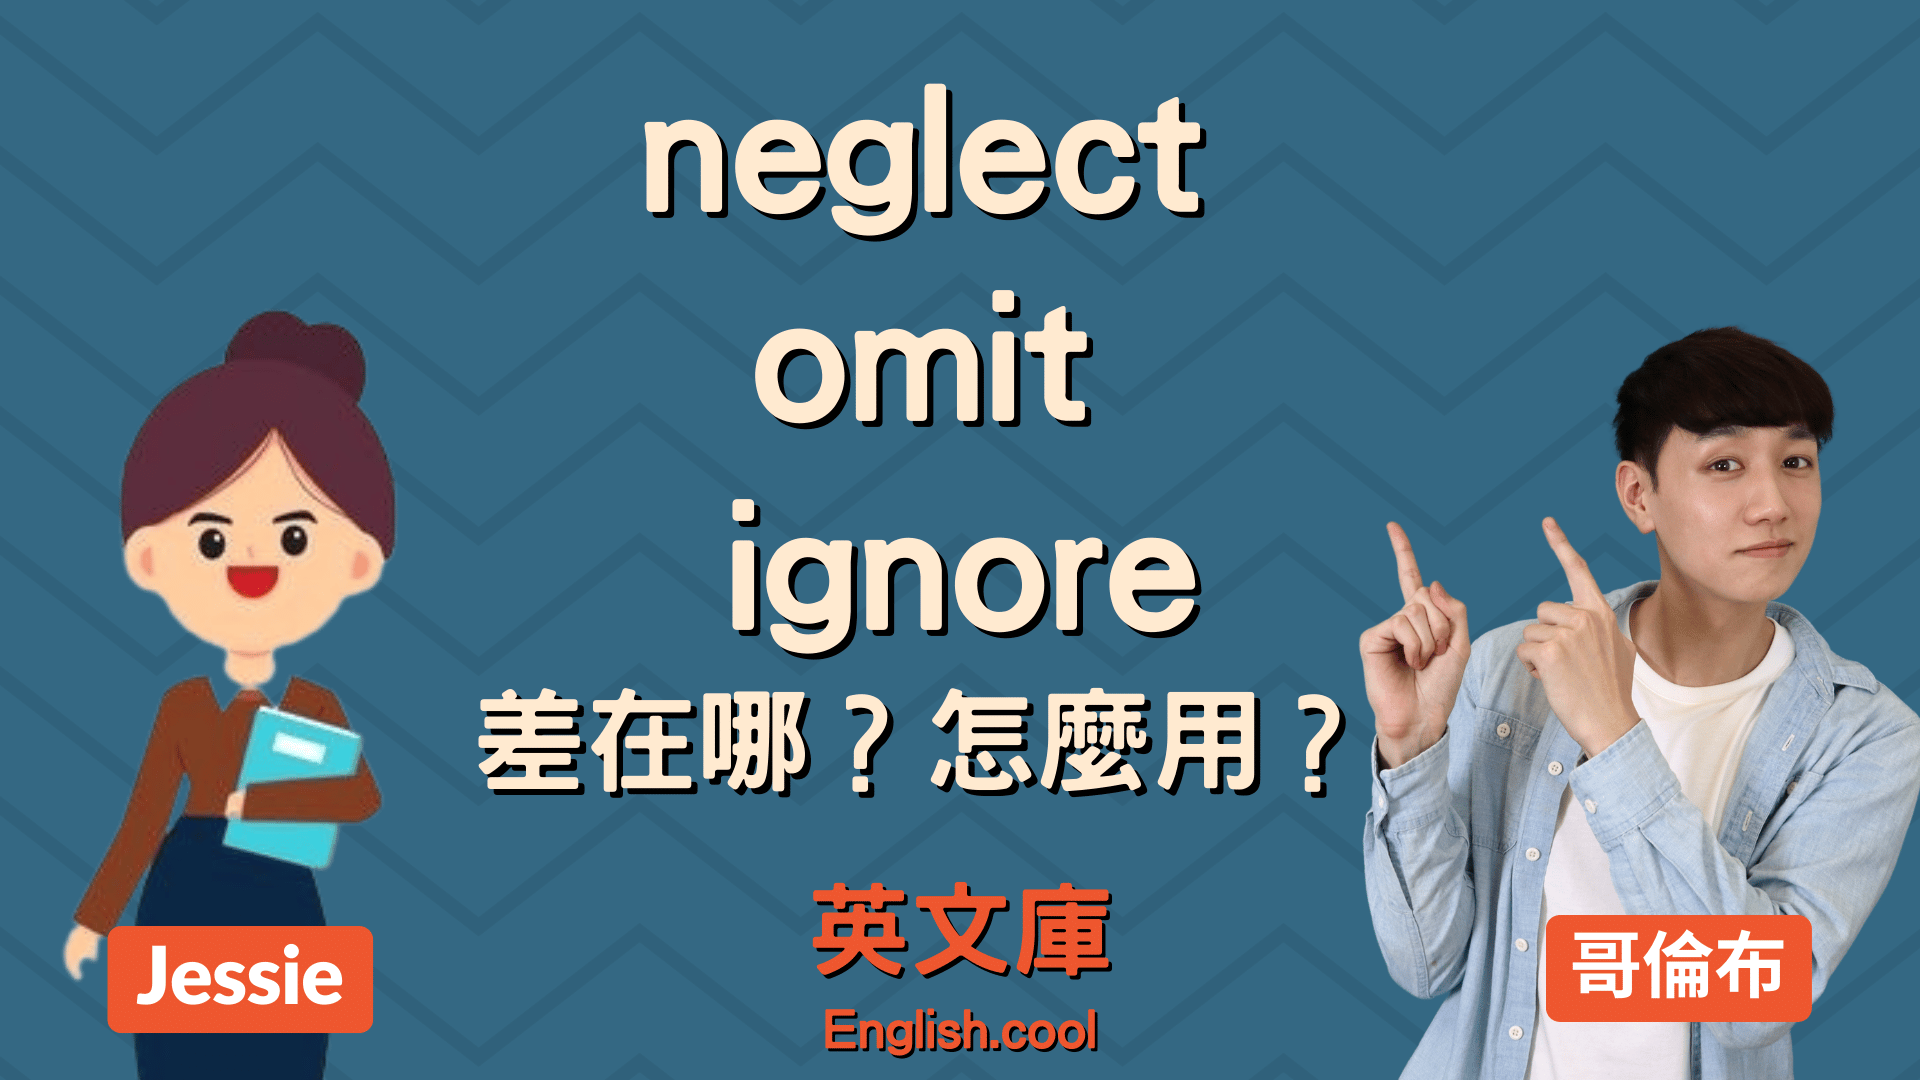 You are currently viewing 【疏忽英文】neglect、omit、ignore 差在哪？怎麼用？